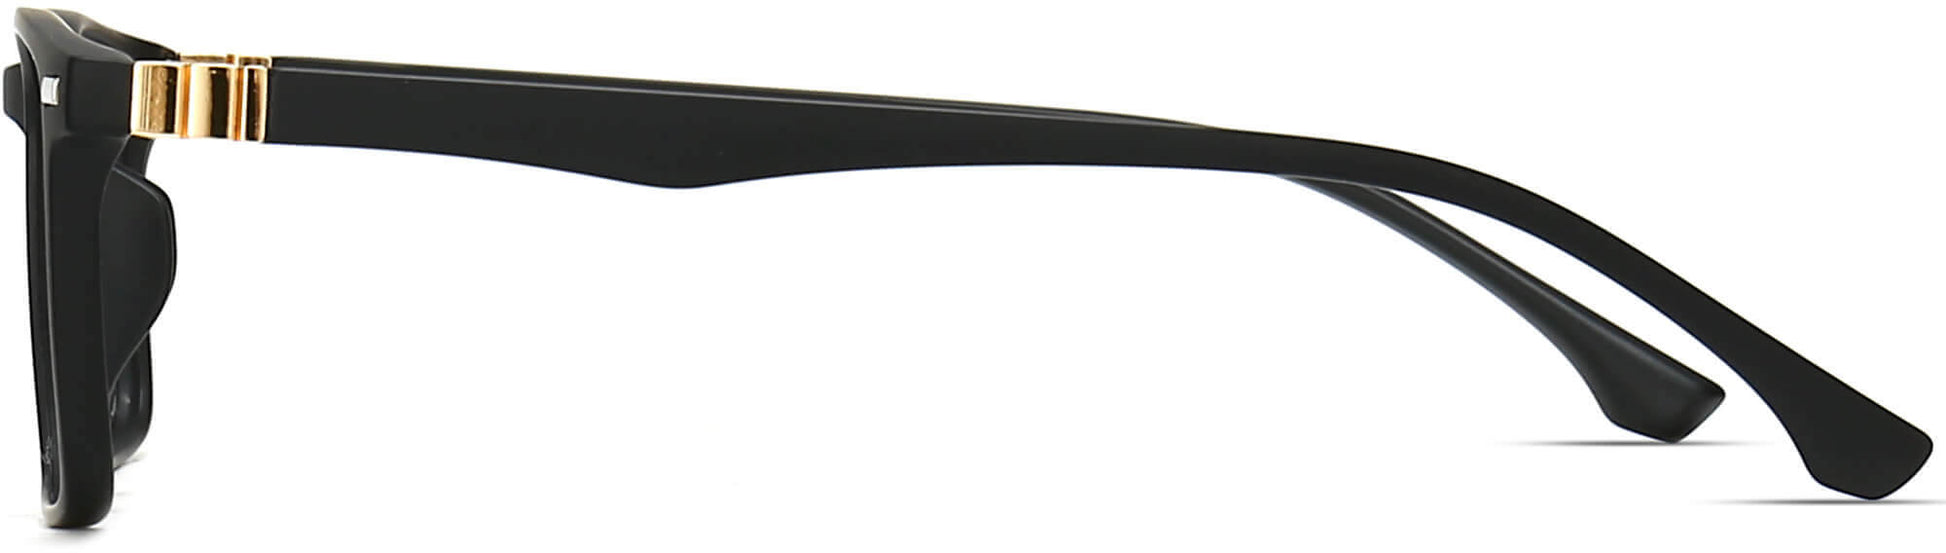 Victor Rectangle Black Eyeglasses from ANRRI, side view